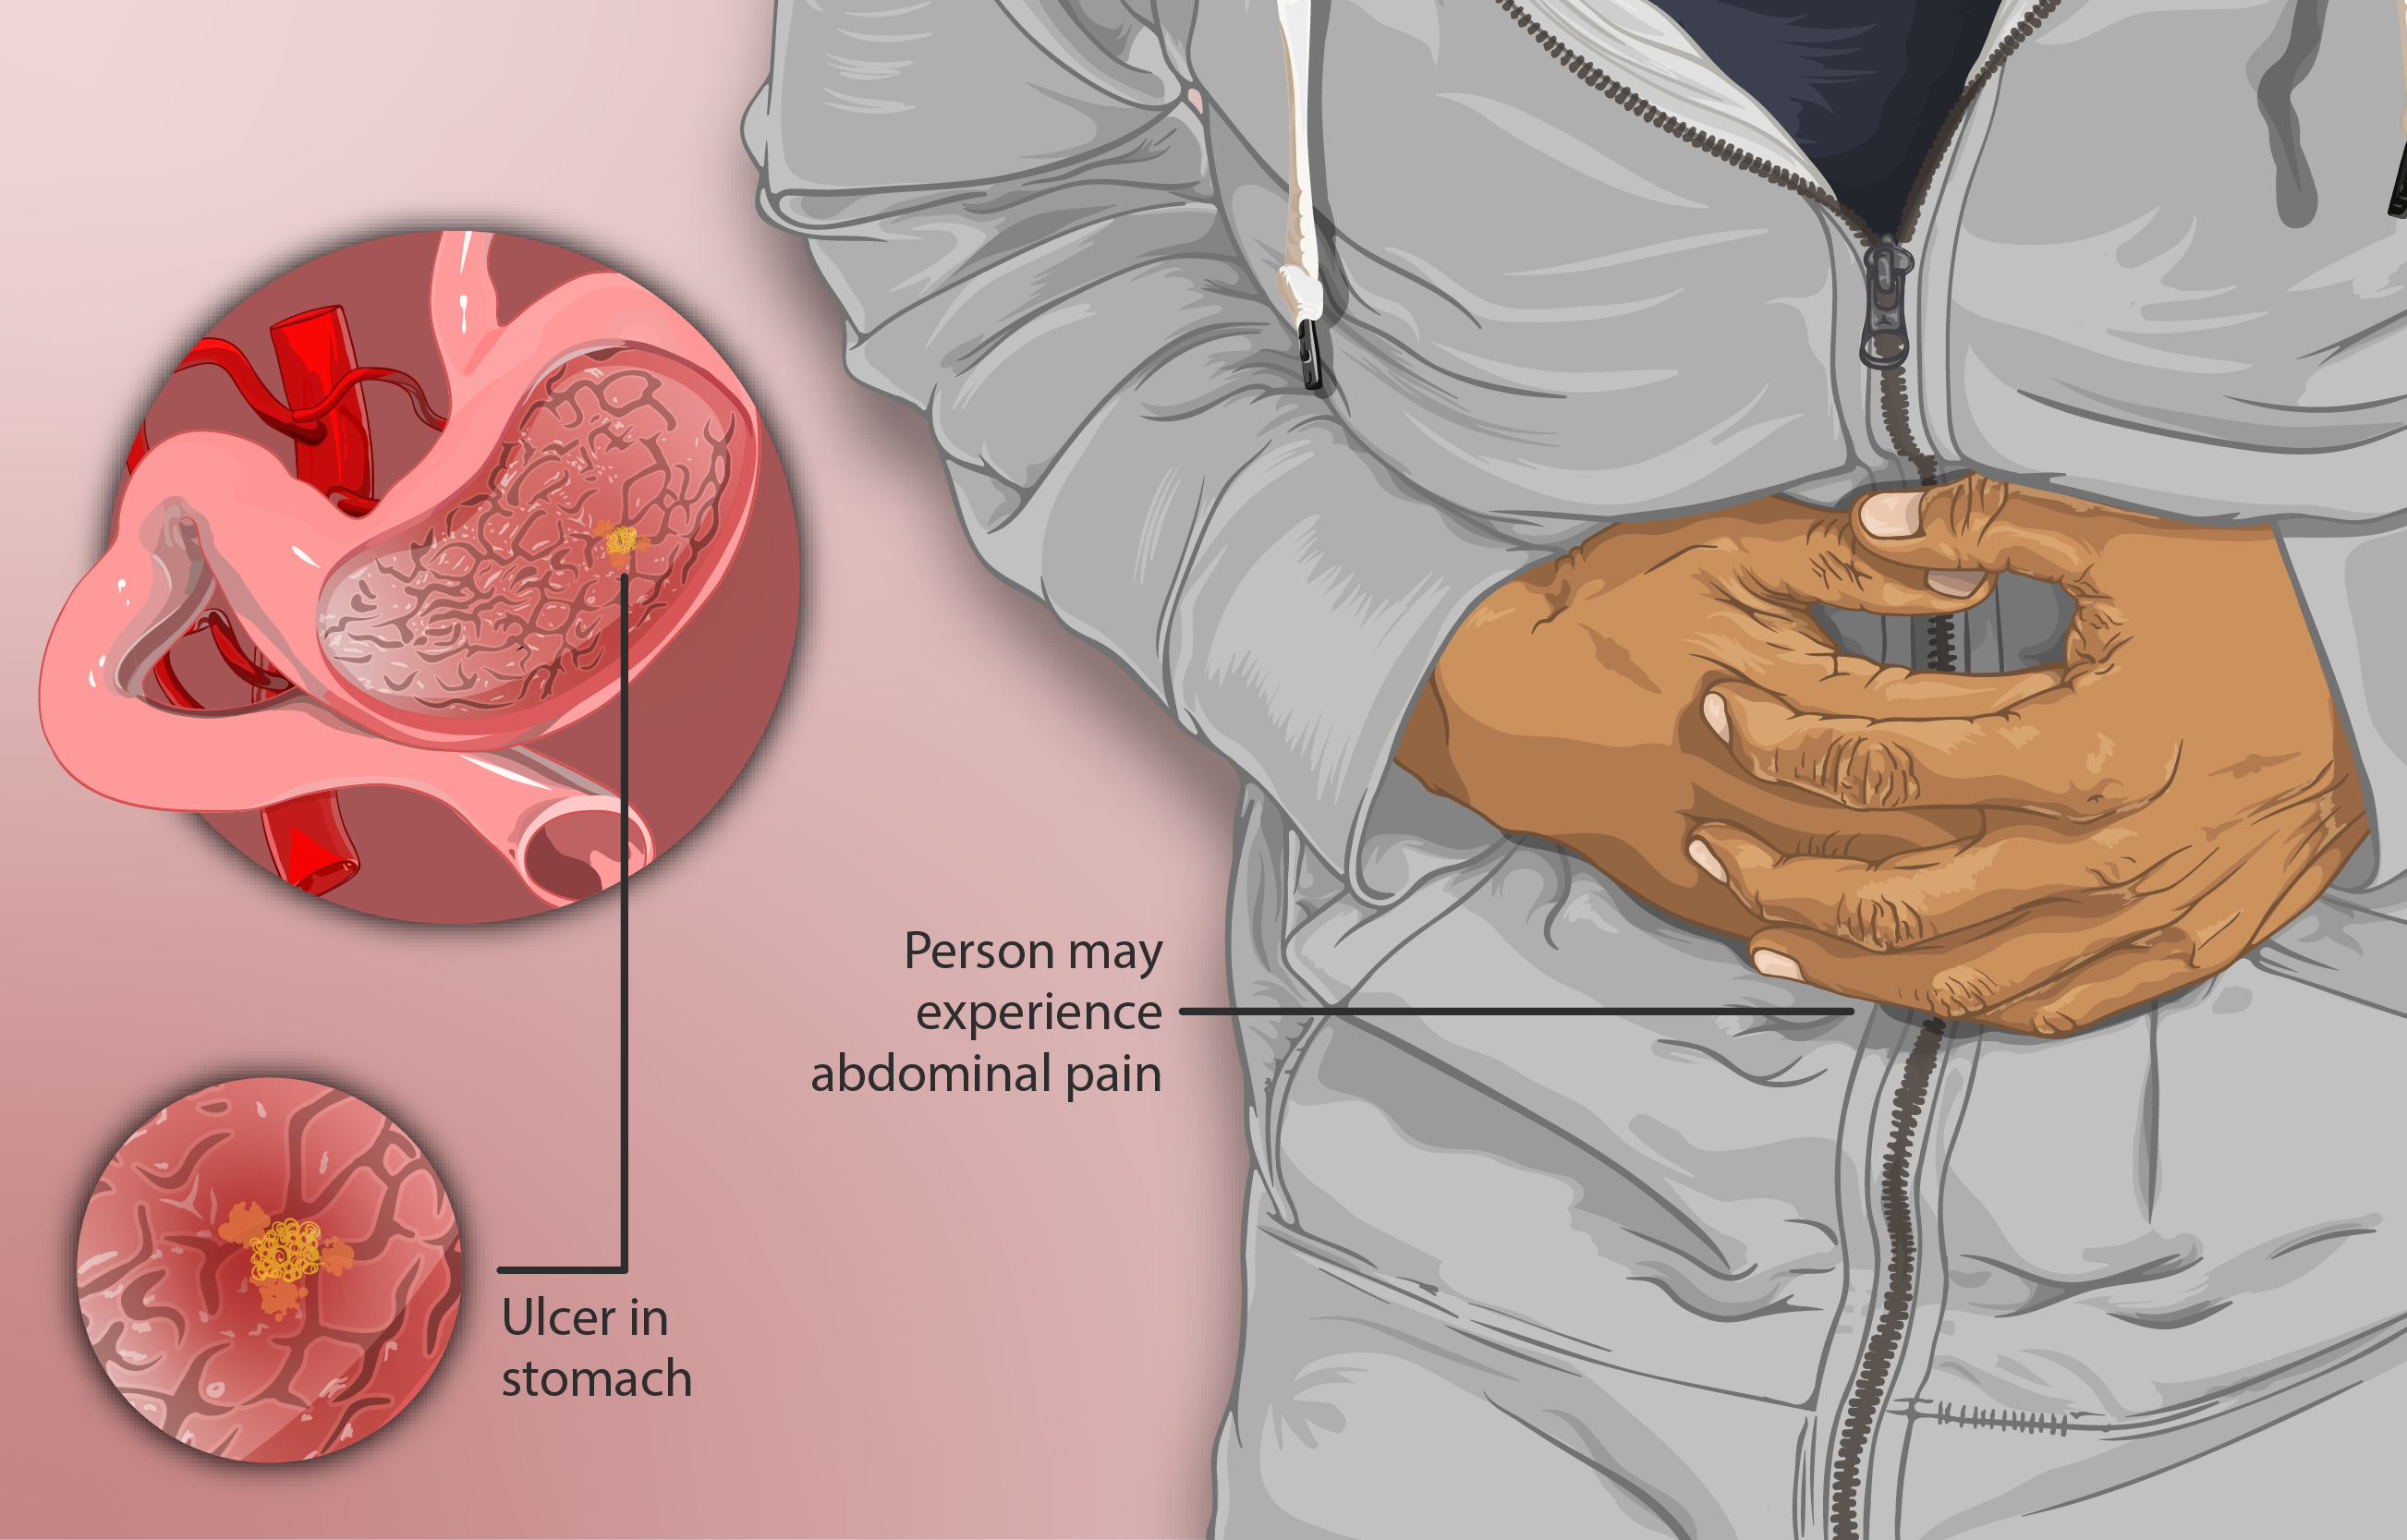 Depiction of a patient suffering from peptic ulcers